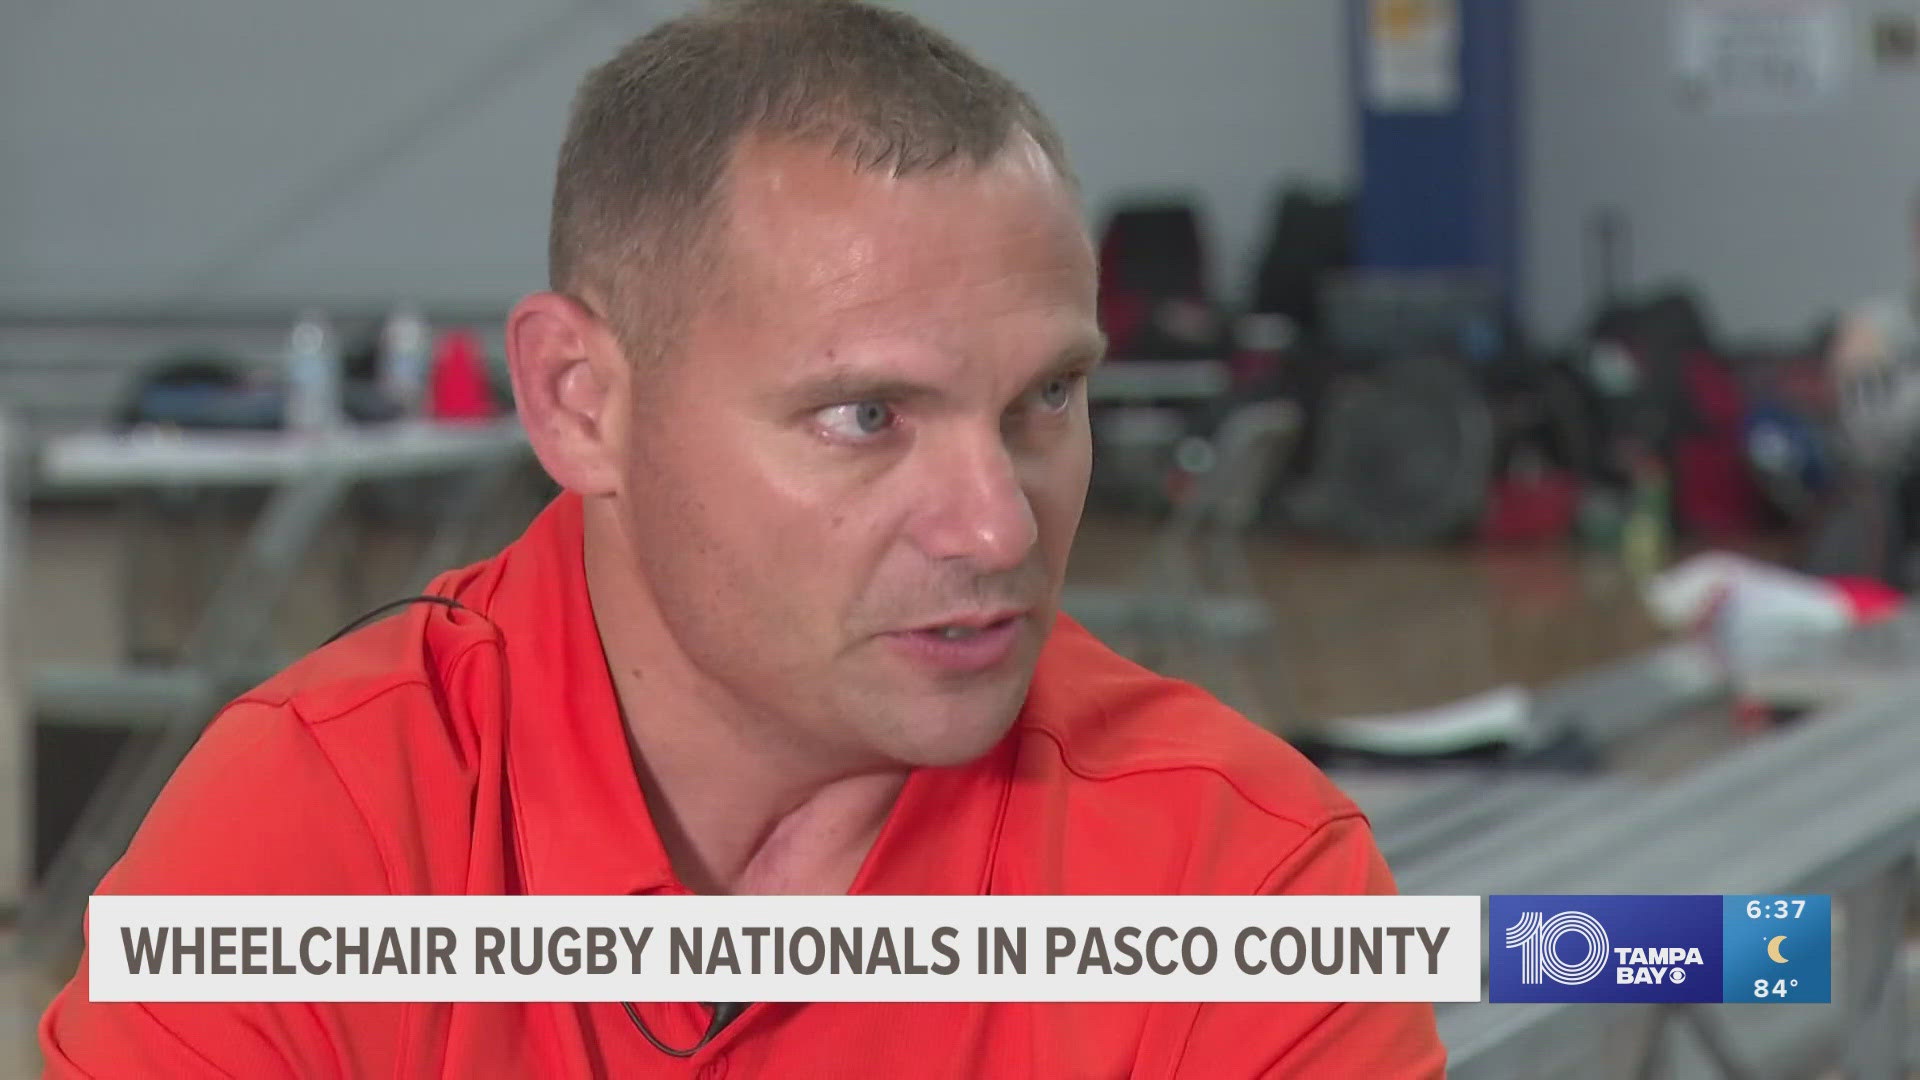 A local Wounded Warrior shares his journey with The National Wheelchair Rugby Association.